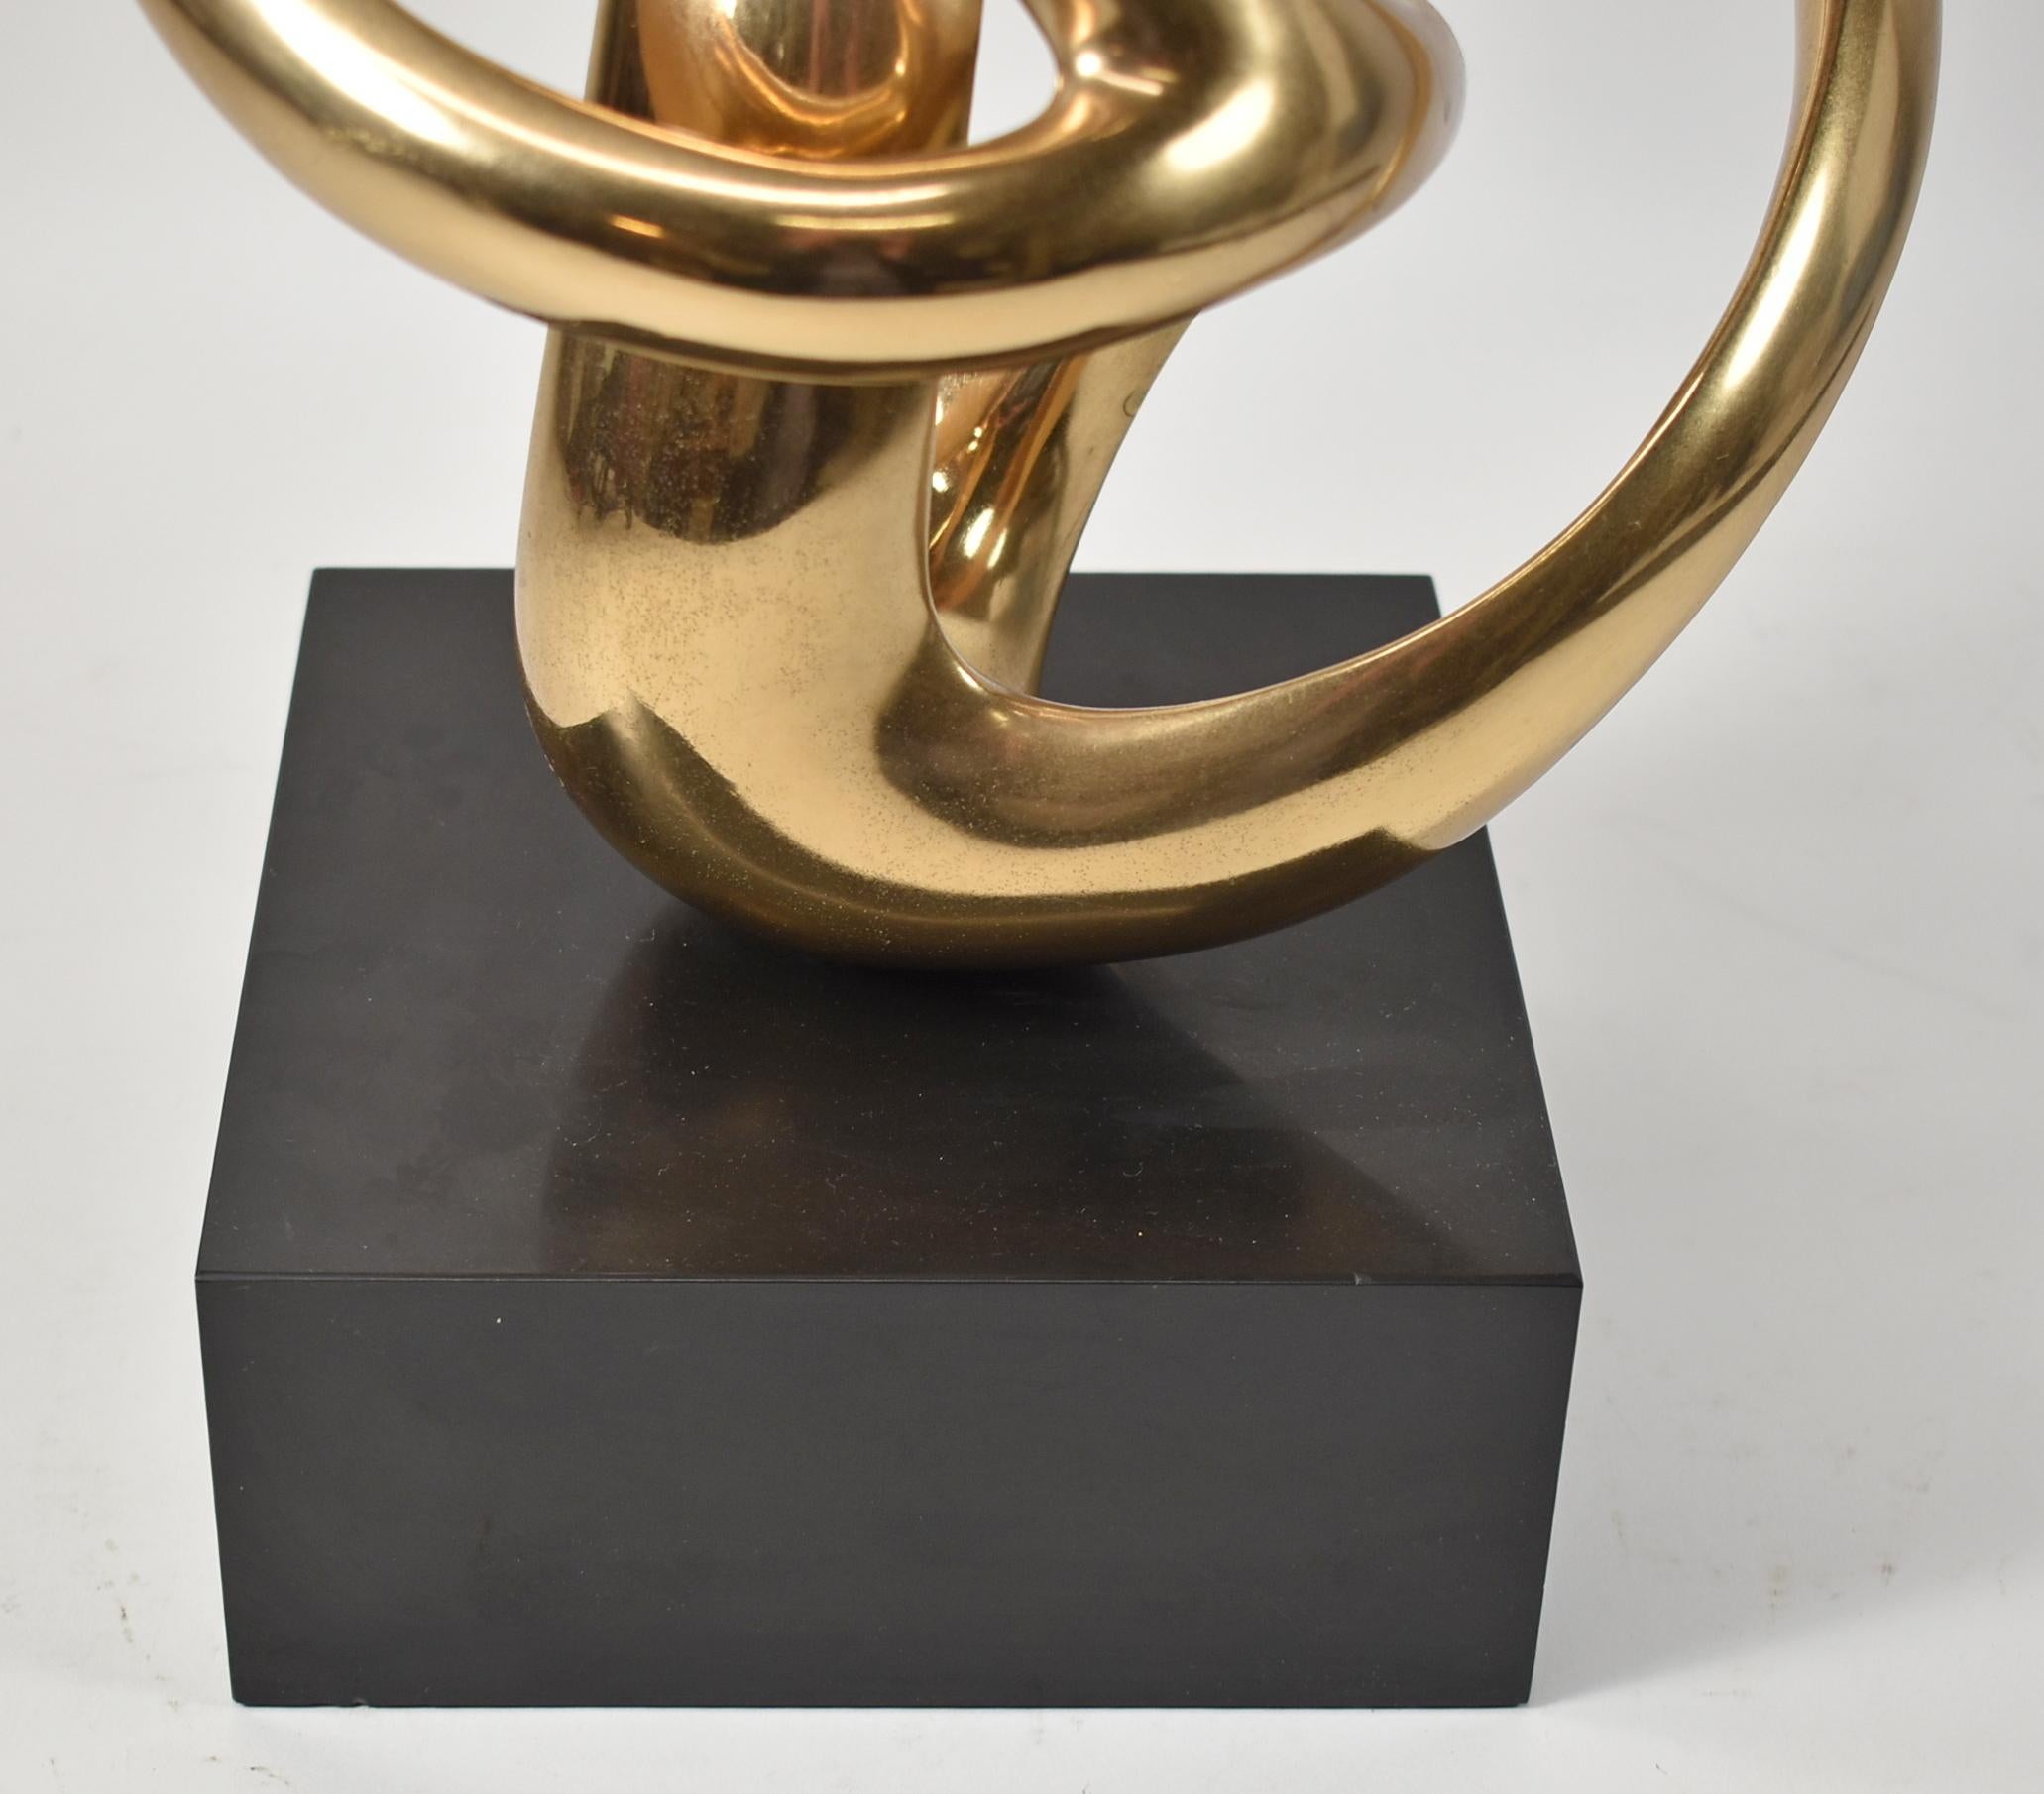 Bronze biomorphic sculpture by Antonio Grediaga Kieff. Circa 1985. Gold patina polished bronze sculpture from the folklore series by Kieff. Numbered 3 from the edition of 9, with signature by the artist on a 3